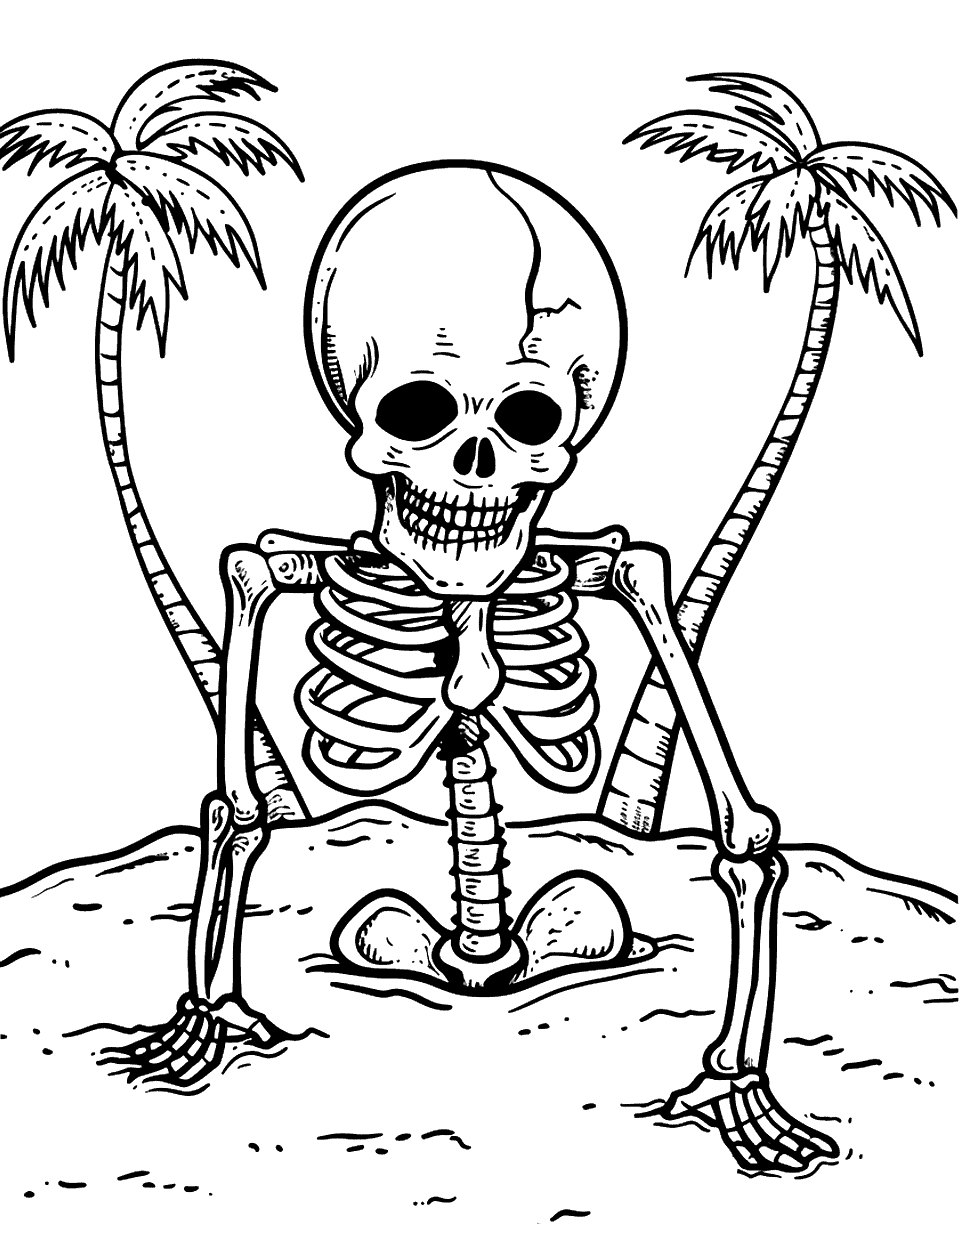 Pirate Skeleton on an Island Coloring Page - A pirate skeleton buried in the sand on a deserted island with palm trees.